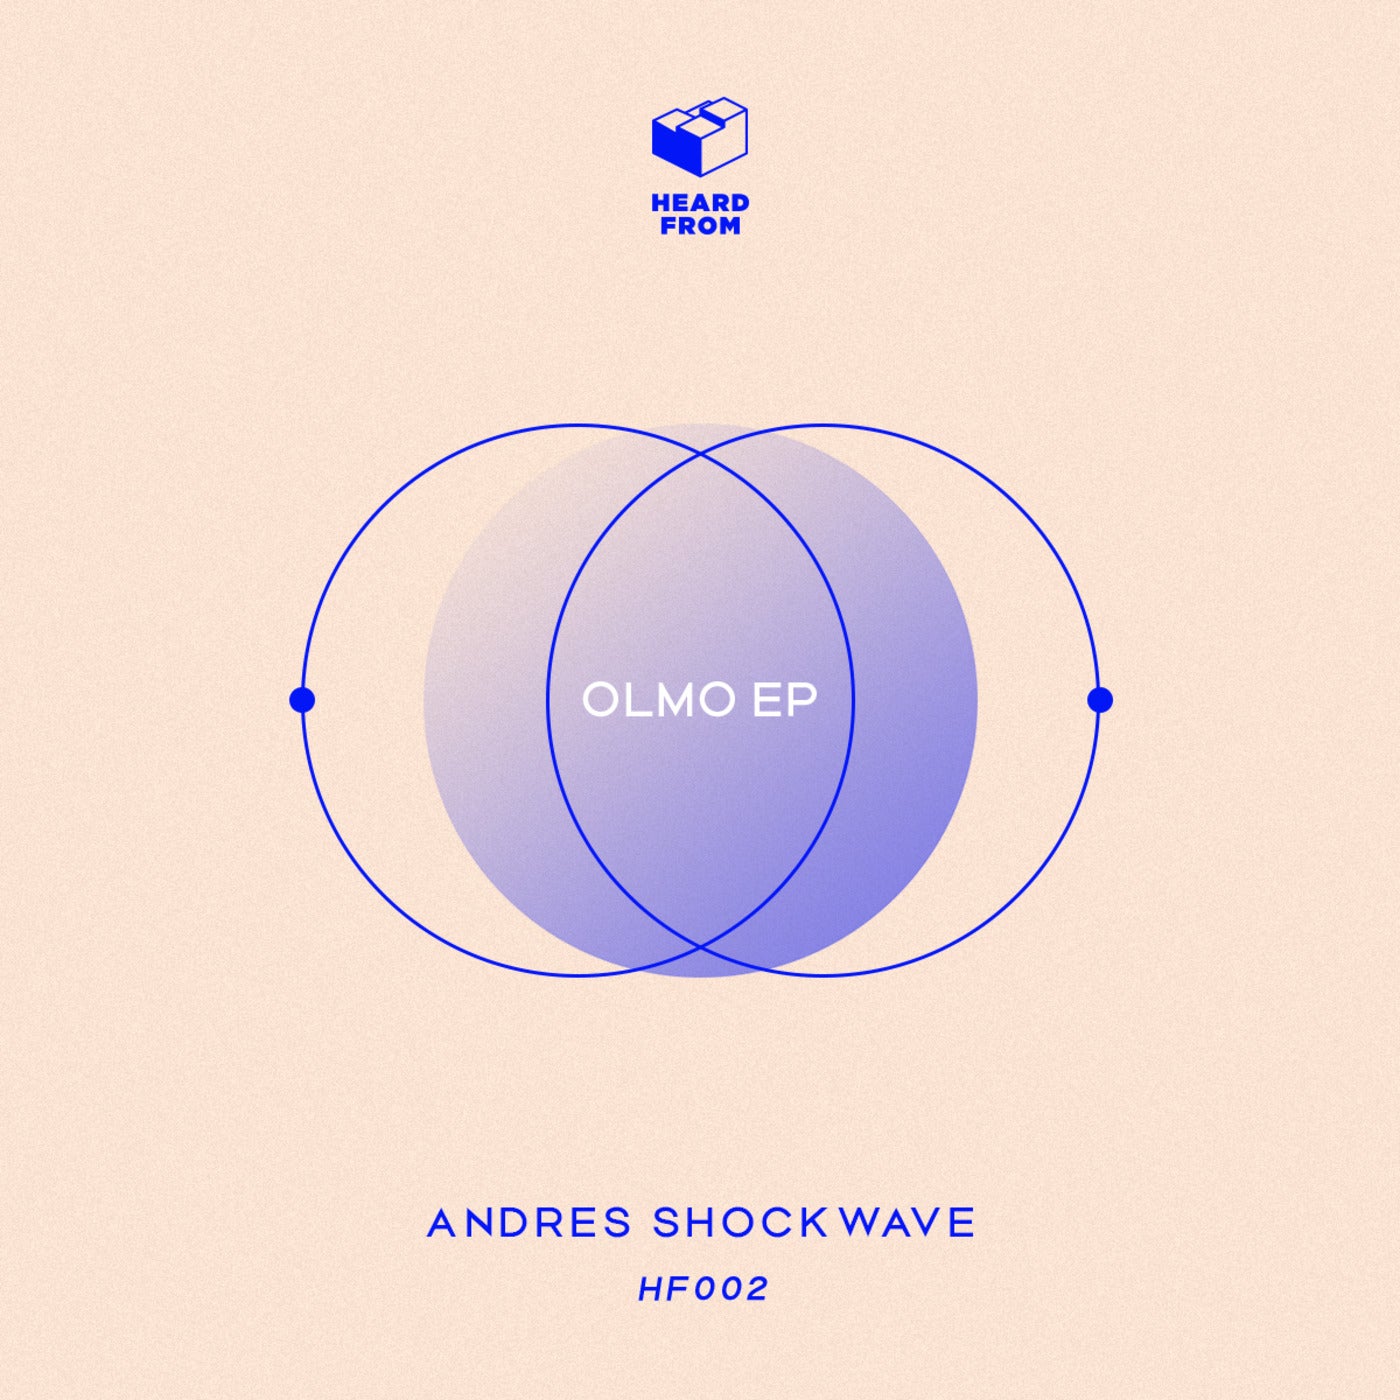 Olmo EP